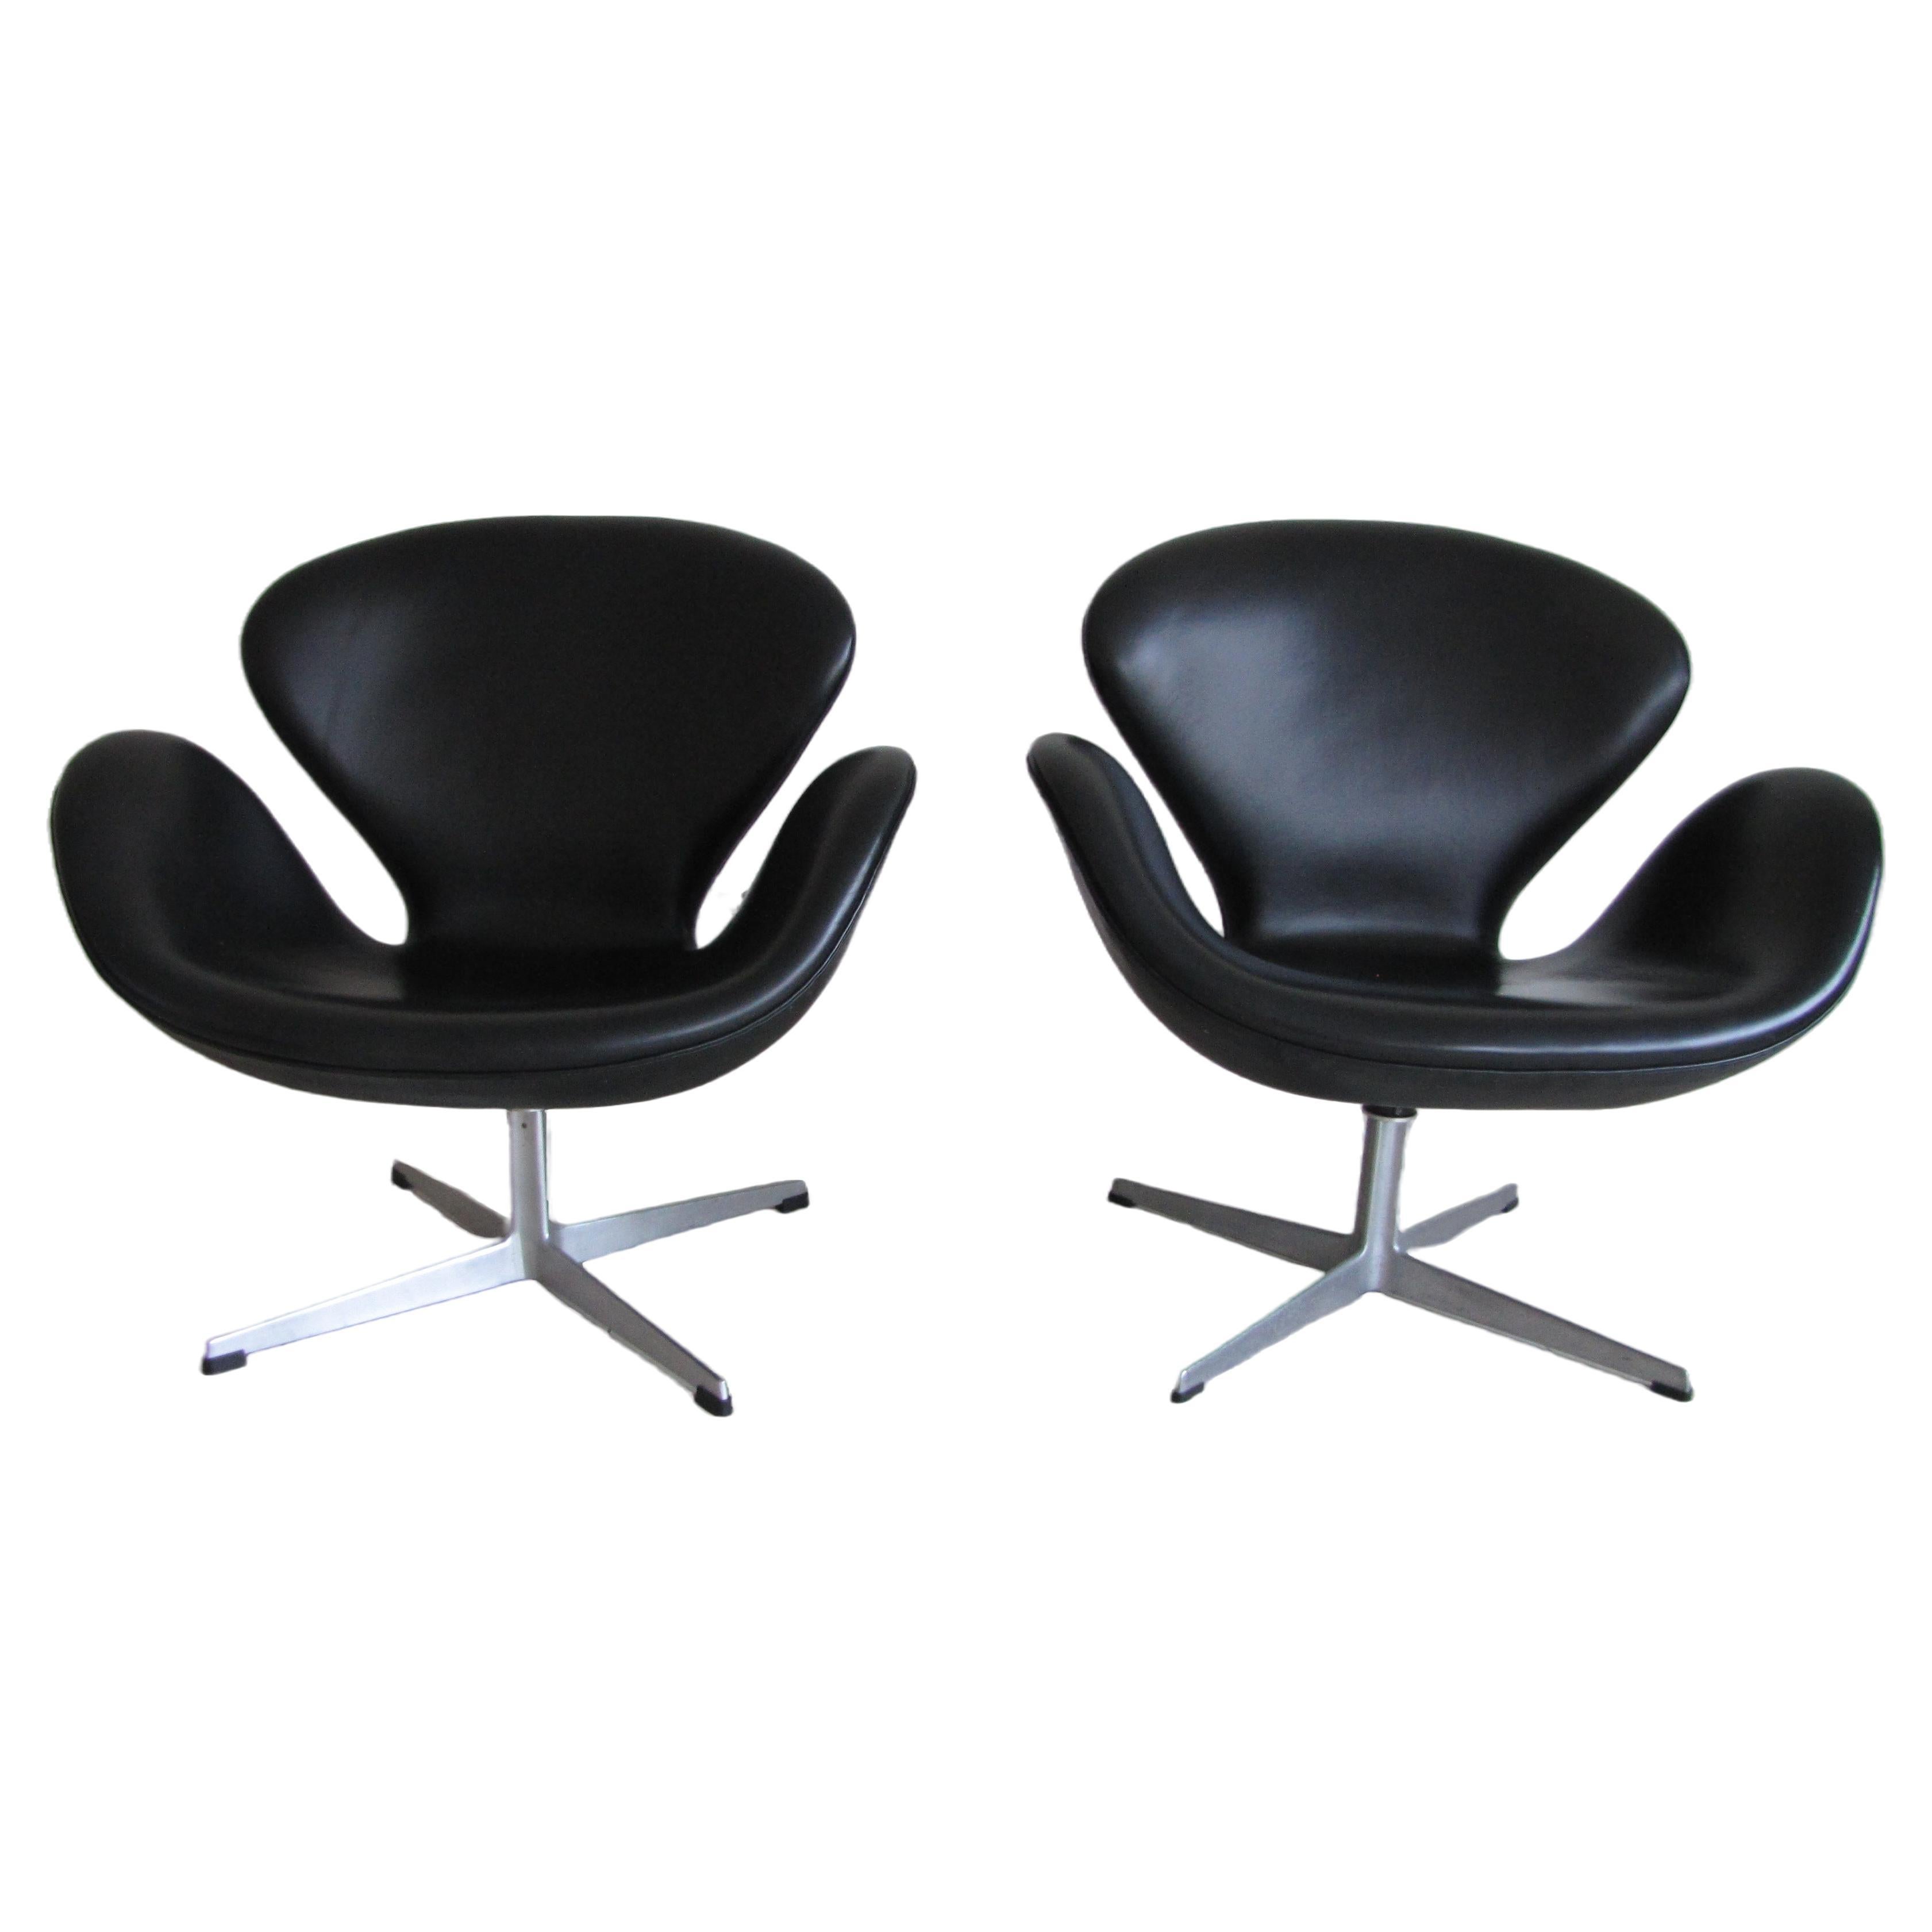 Pair of Swan chairs in black leather by Arne Jacobsen for Fritz Hansen